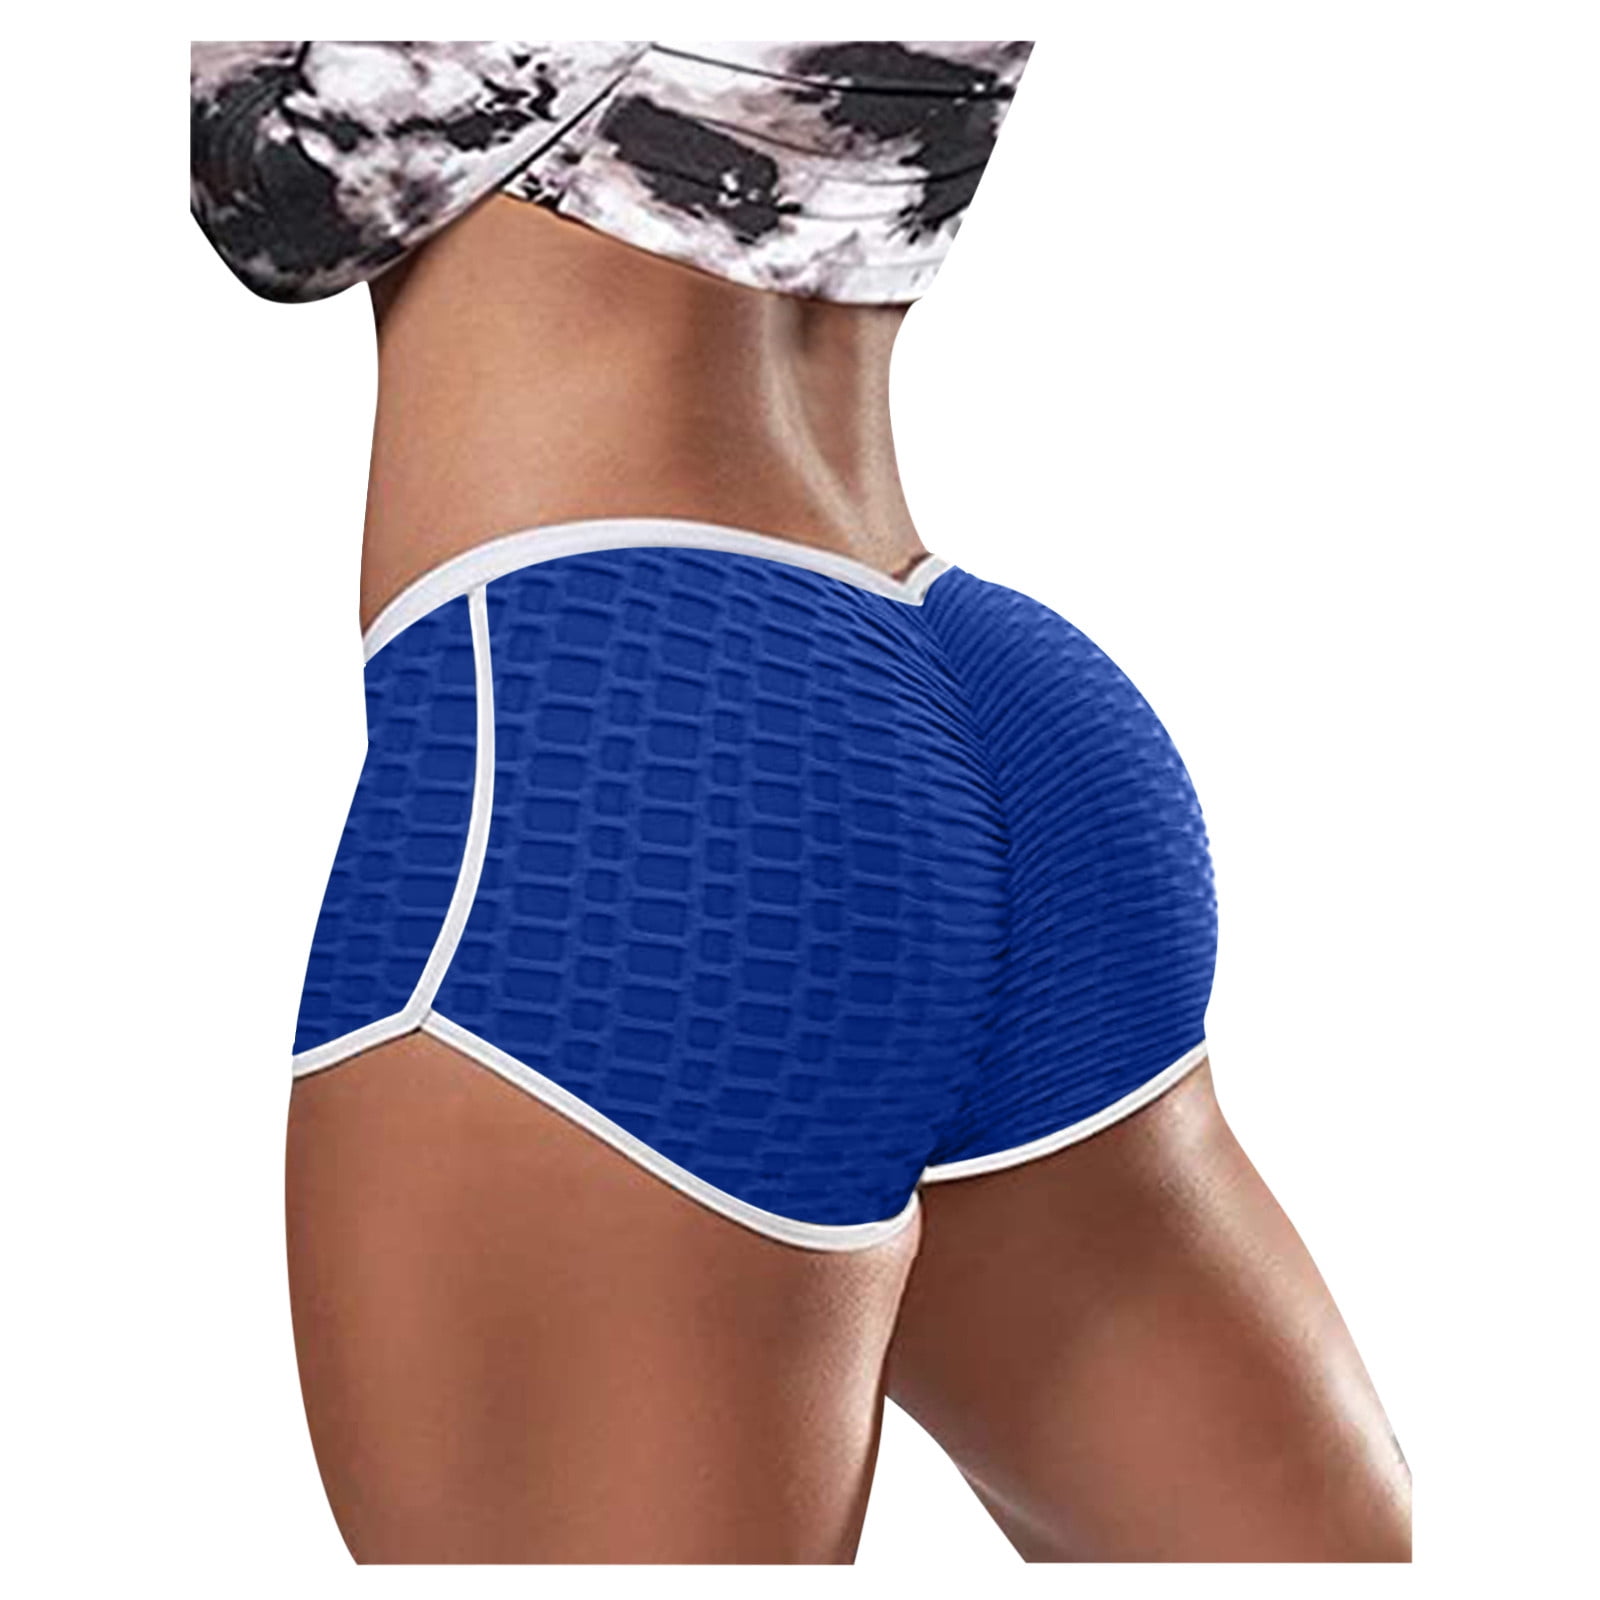 Blue Firm Culos Grandes Y Bellos High Rise Shaper Short With Tummy Control, Booty  Lifting, And Buttocks Enhancement From Xiahuaguo, $23.08